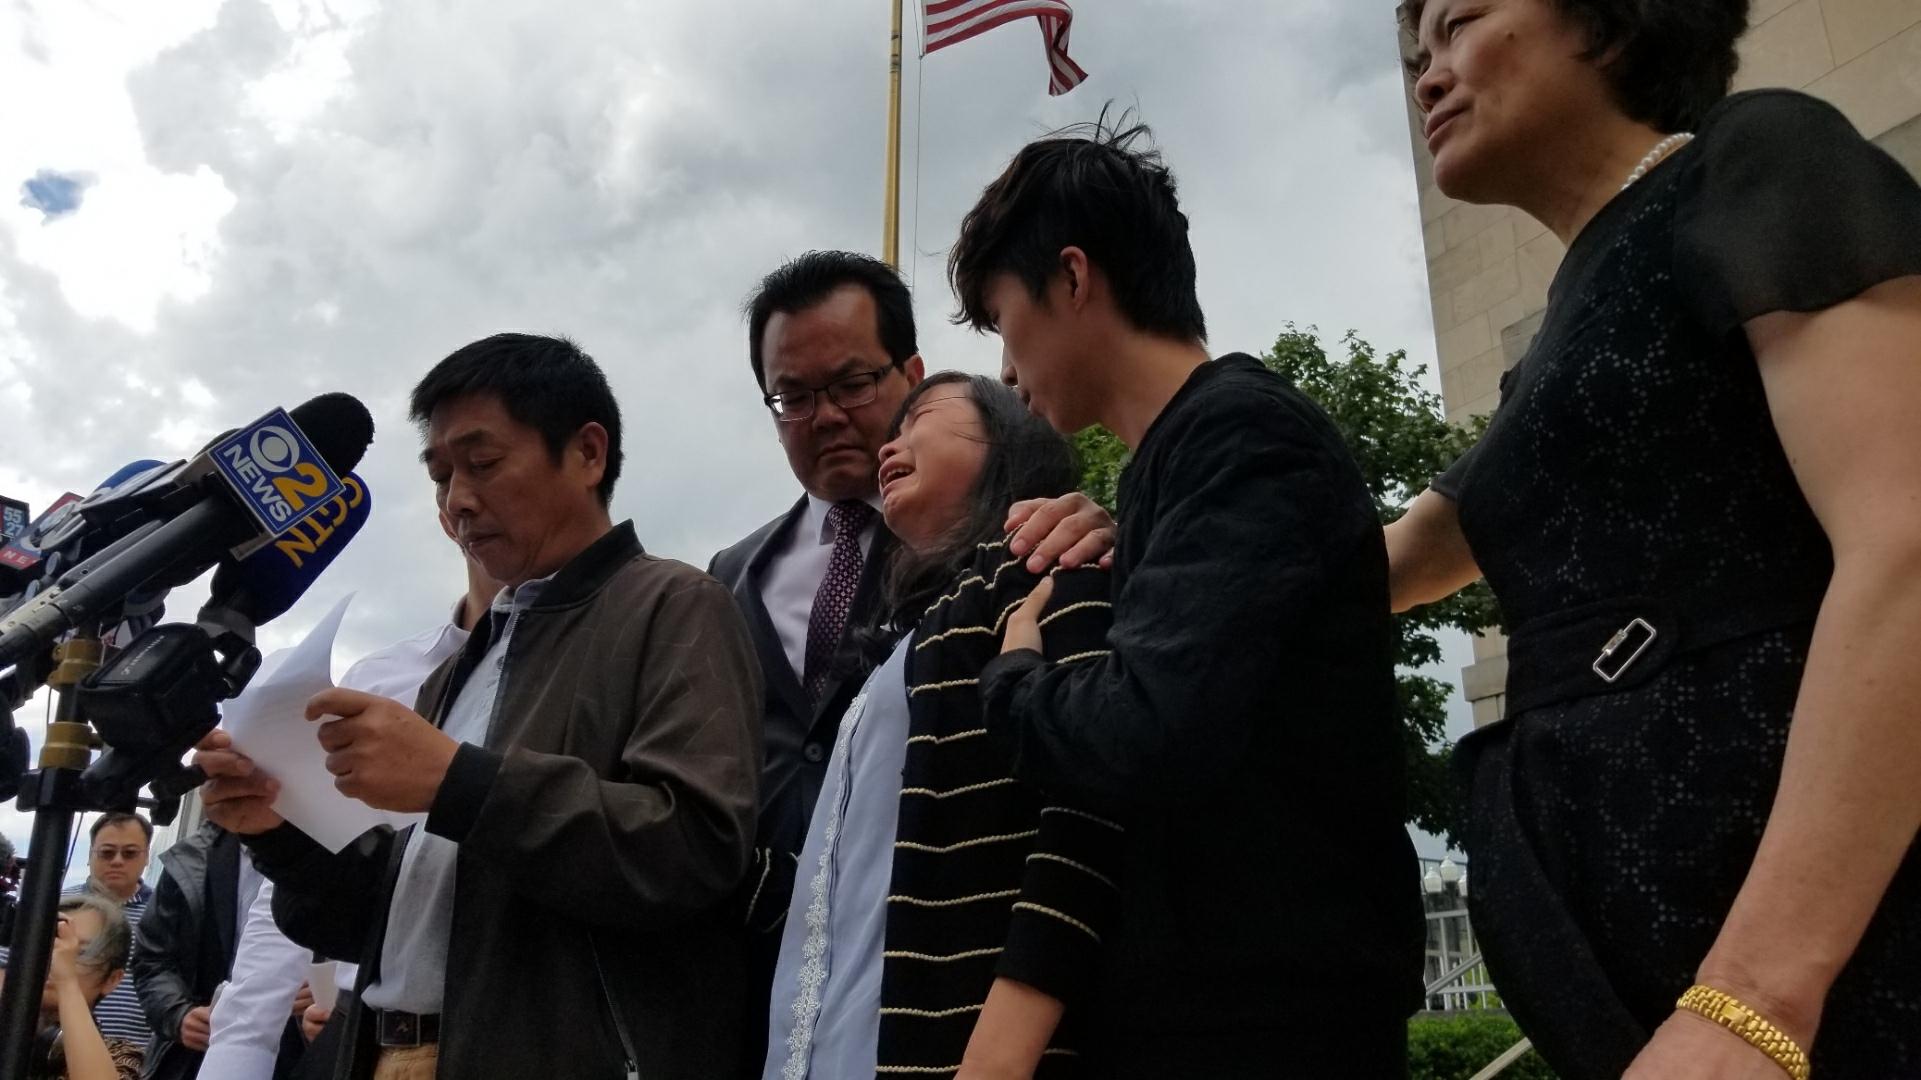 Yingying Zhang’s father, Ronggao Zhang, reads a statement in Chinese outside the federal courthouse in Peoria, Illinois, on Monday, June 24, 2019, moments after a 12-person jury found Brendt Christensen guilty of her kidnapping and death. Yingying Zhang’s mother, Lifeng Ye, sobs as her husband addresses the media. (Matt Masterson / WTTW News)